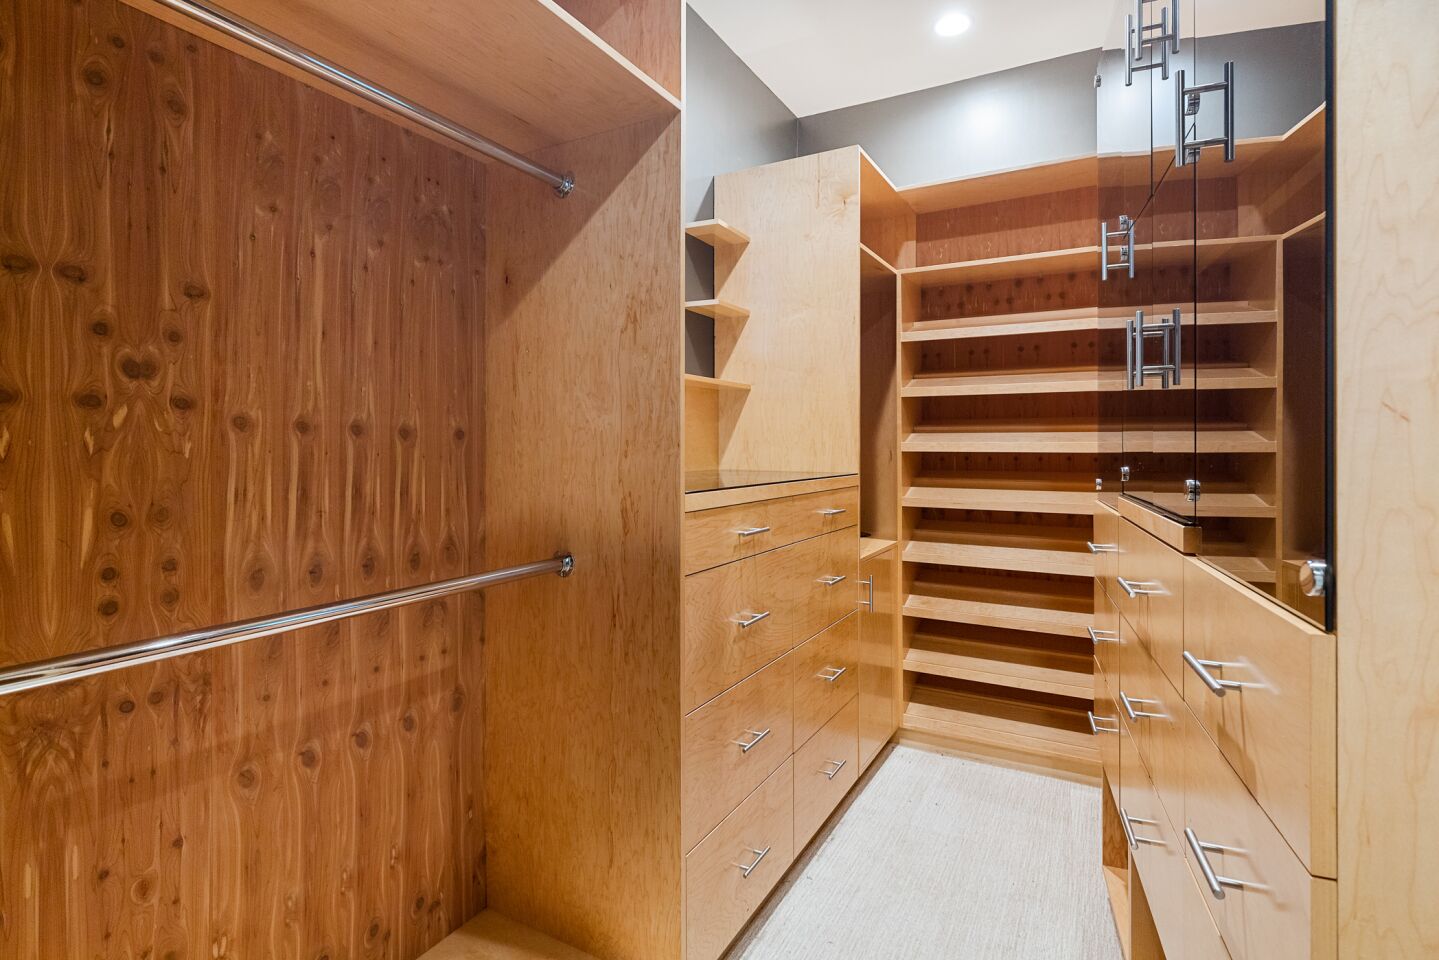 A walk-in closet with extensive wood cabinets and shelves.